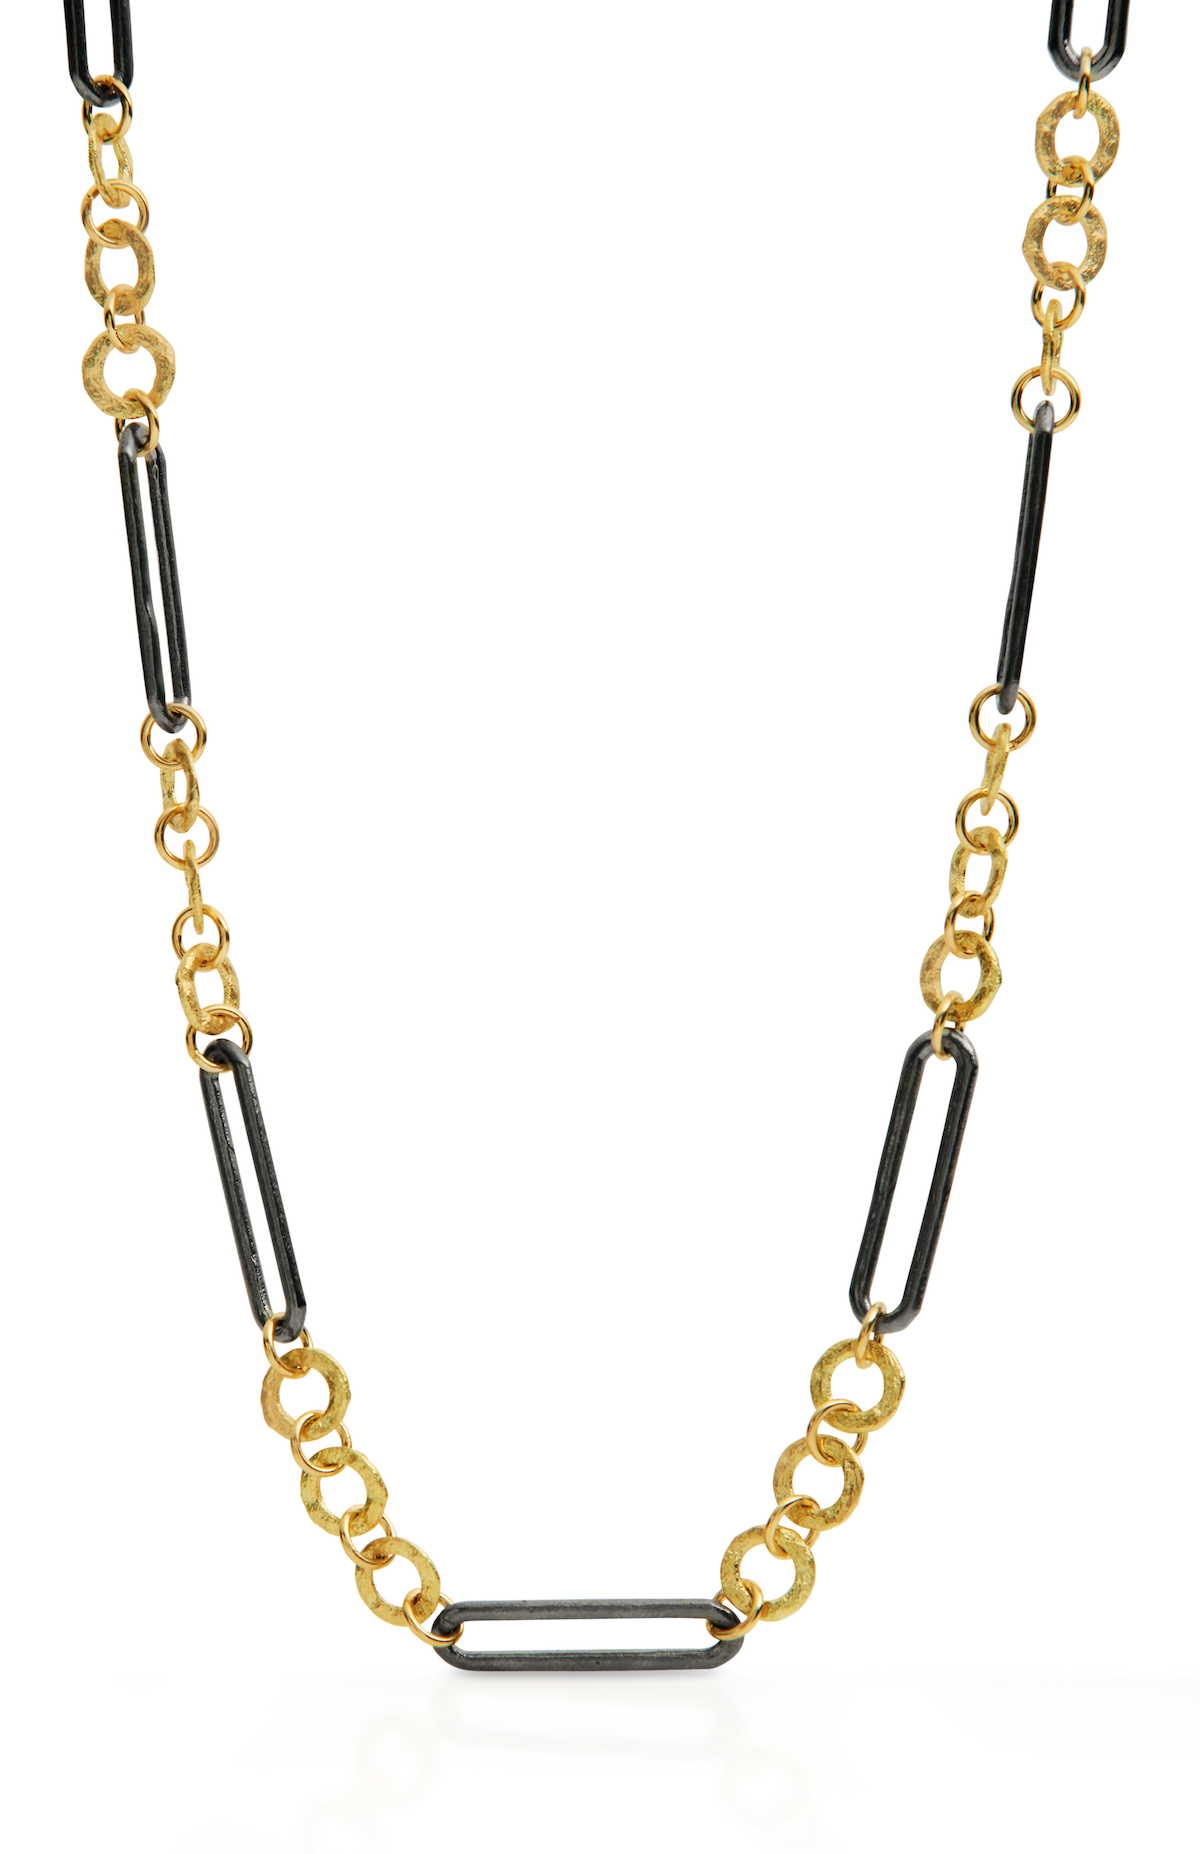 Susie Link and Chain Necklace in Gold